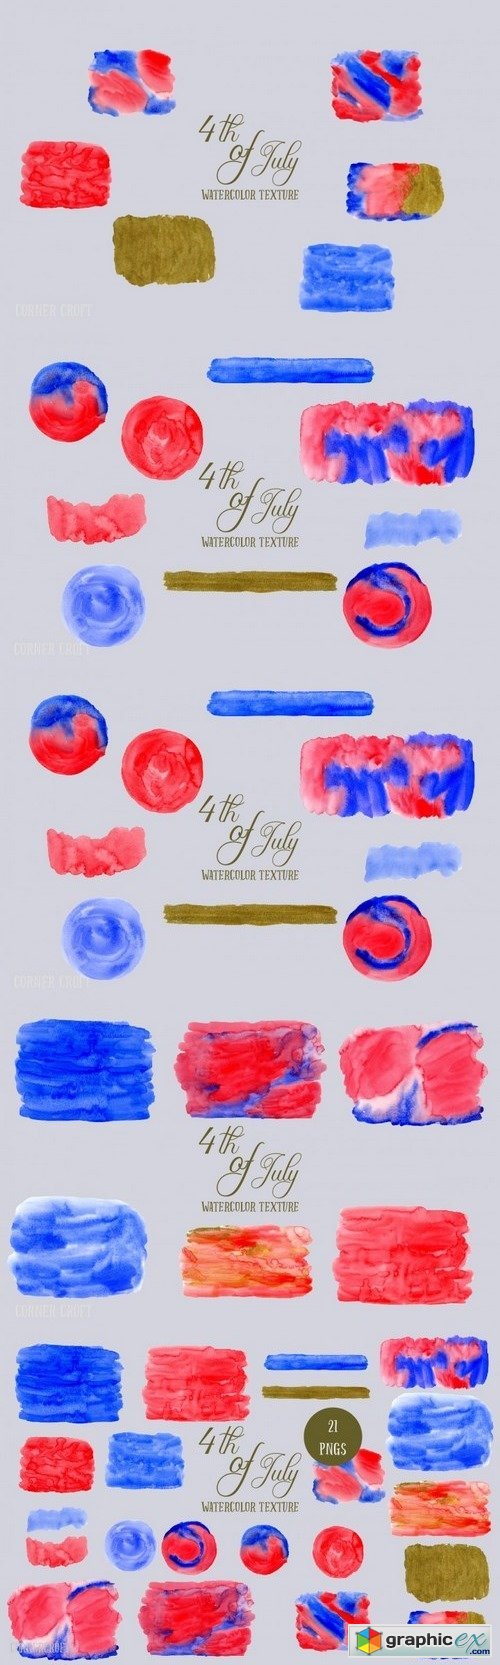 Thehungryjpeg - Watercolor Texture 4th of July 1604963